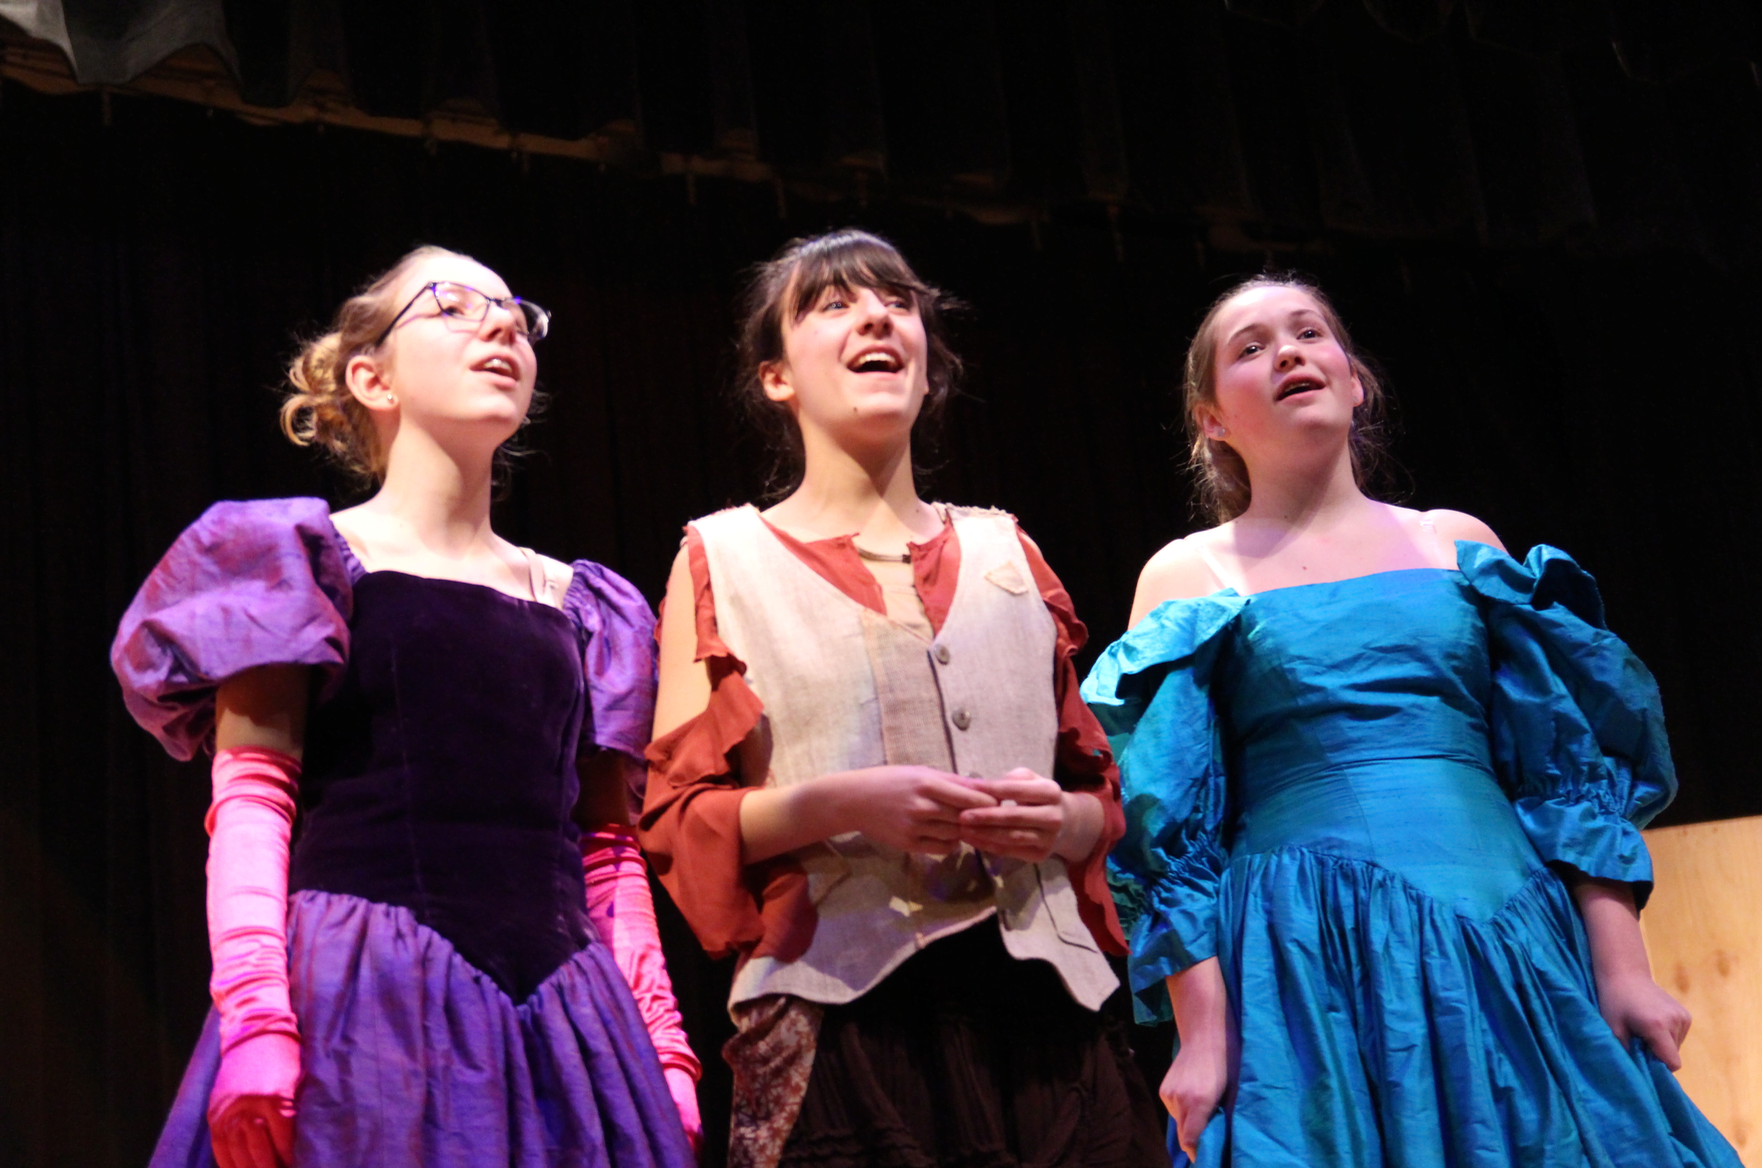 The Eastern Middle School 8th Grade Show Chorus held a dress rehearsal for their upcoming musical performance, “Cinderella." Jan 6, 2018 Photo: Leslie Yager